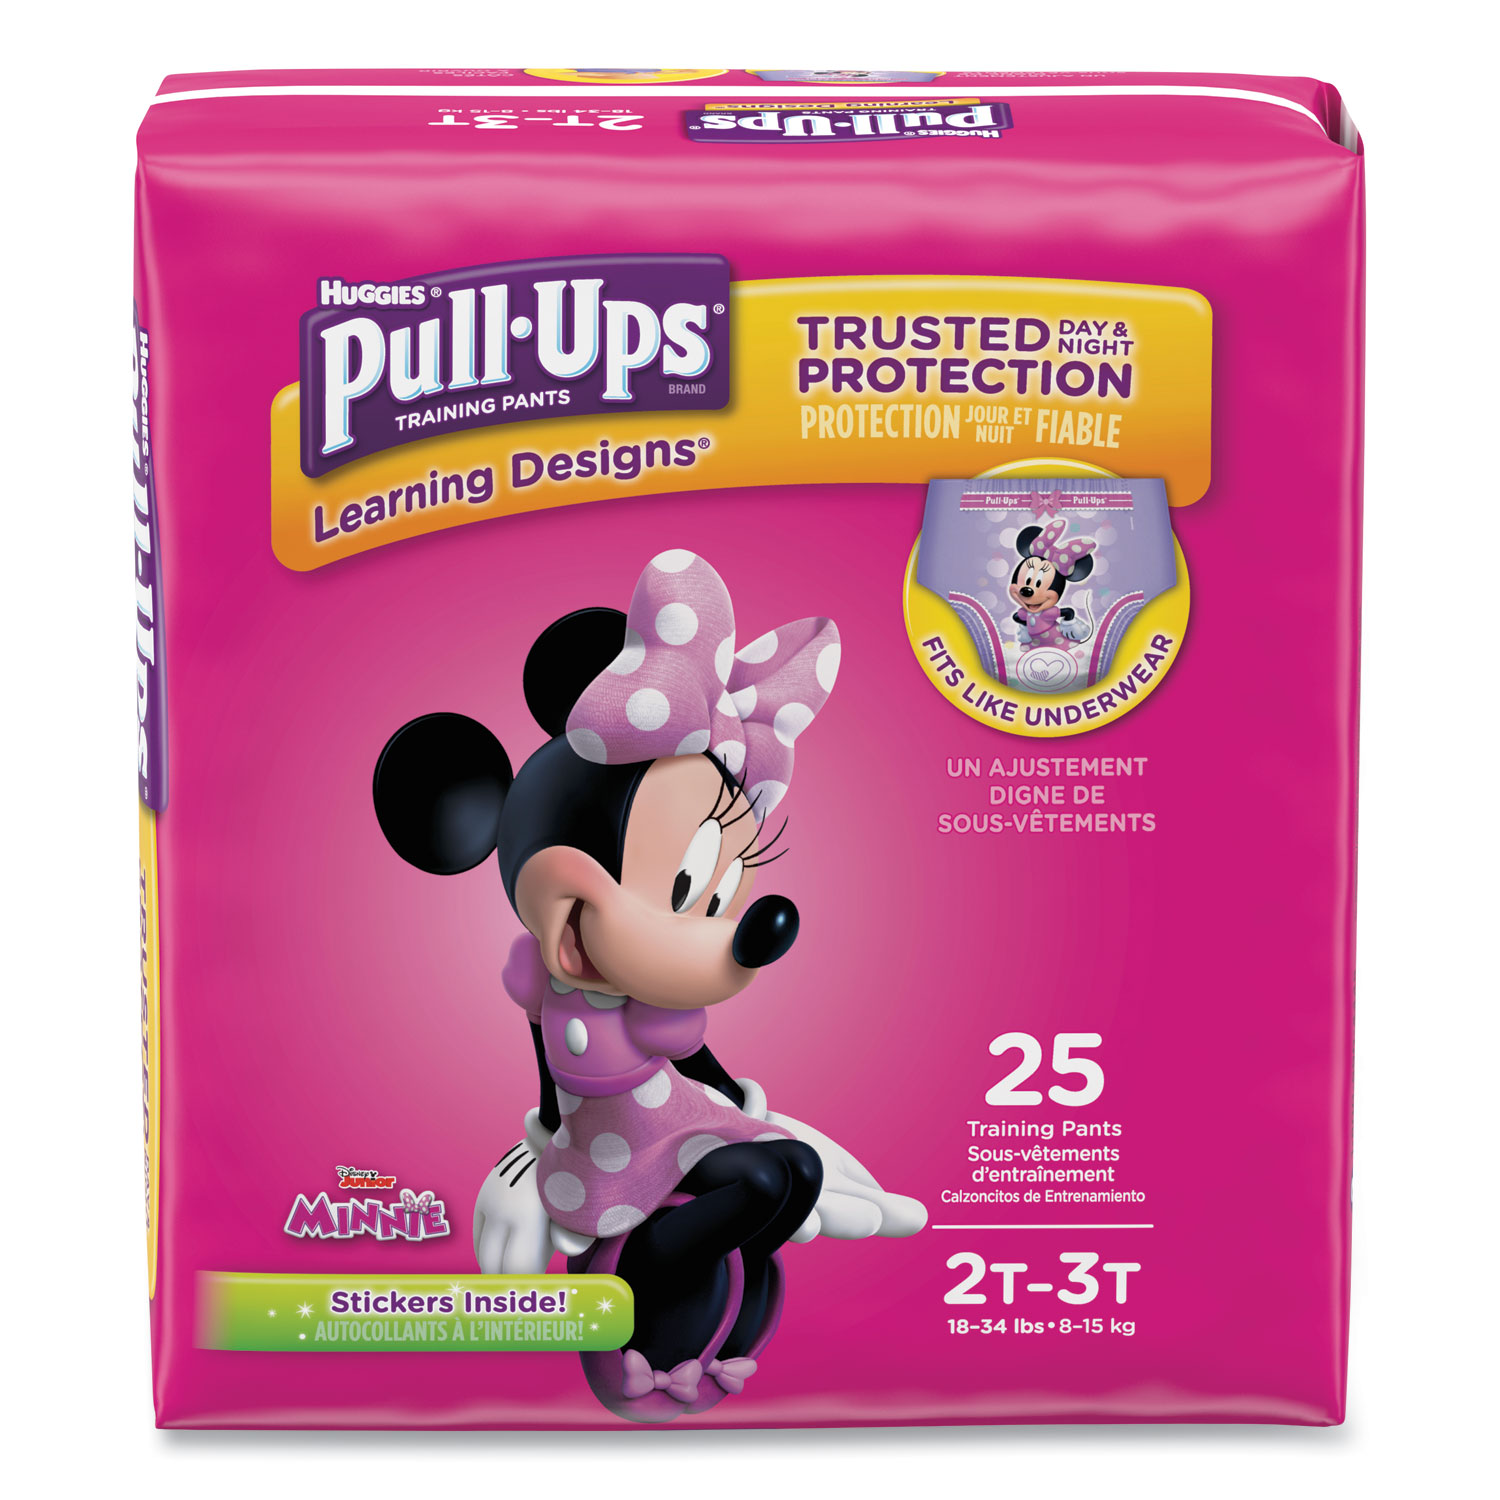  Huggies 45132 Pull-Ups Learning Designs Potty Training Pants for Girls, Size 2T-3T, 25/Pack (KCC45132) 